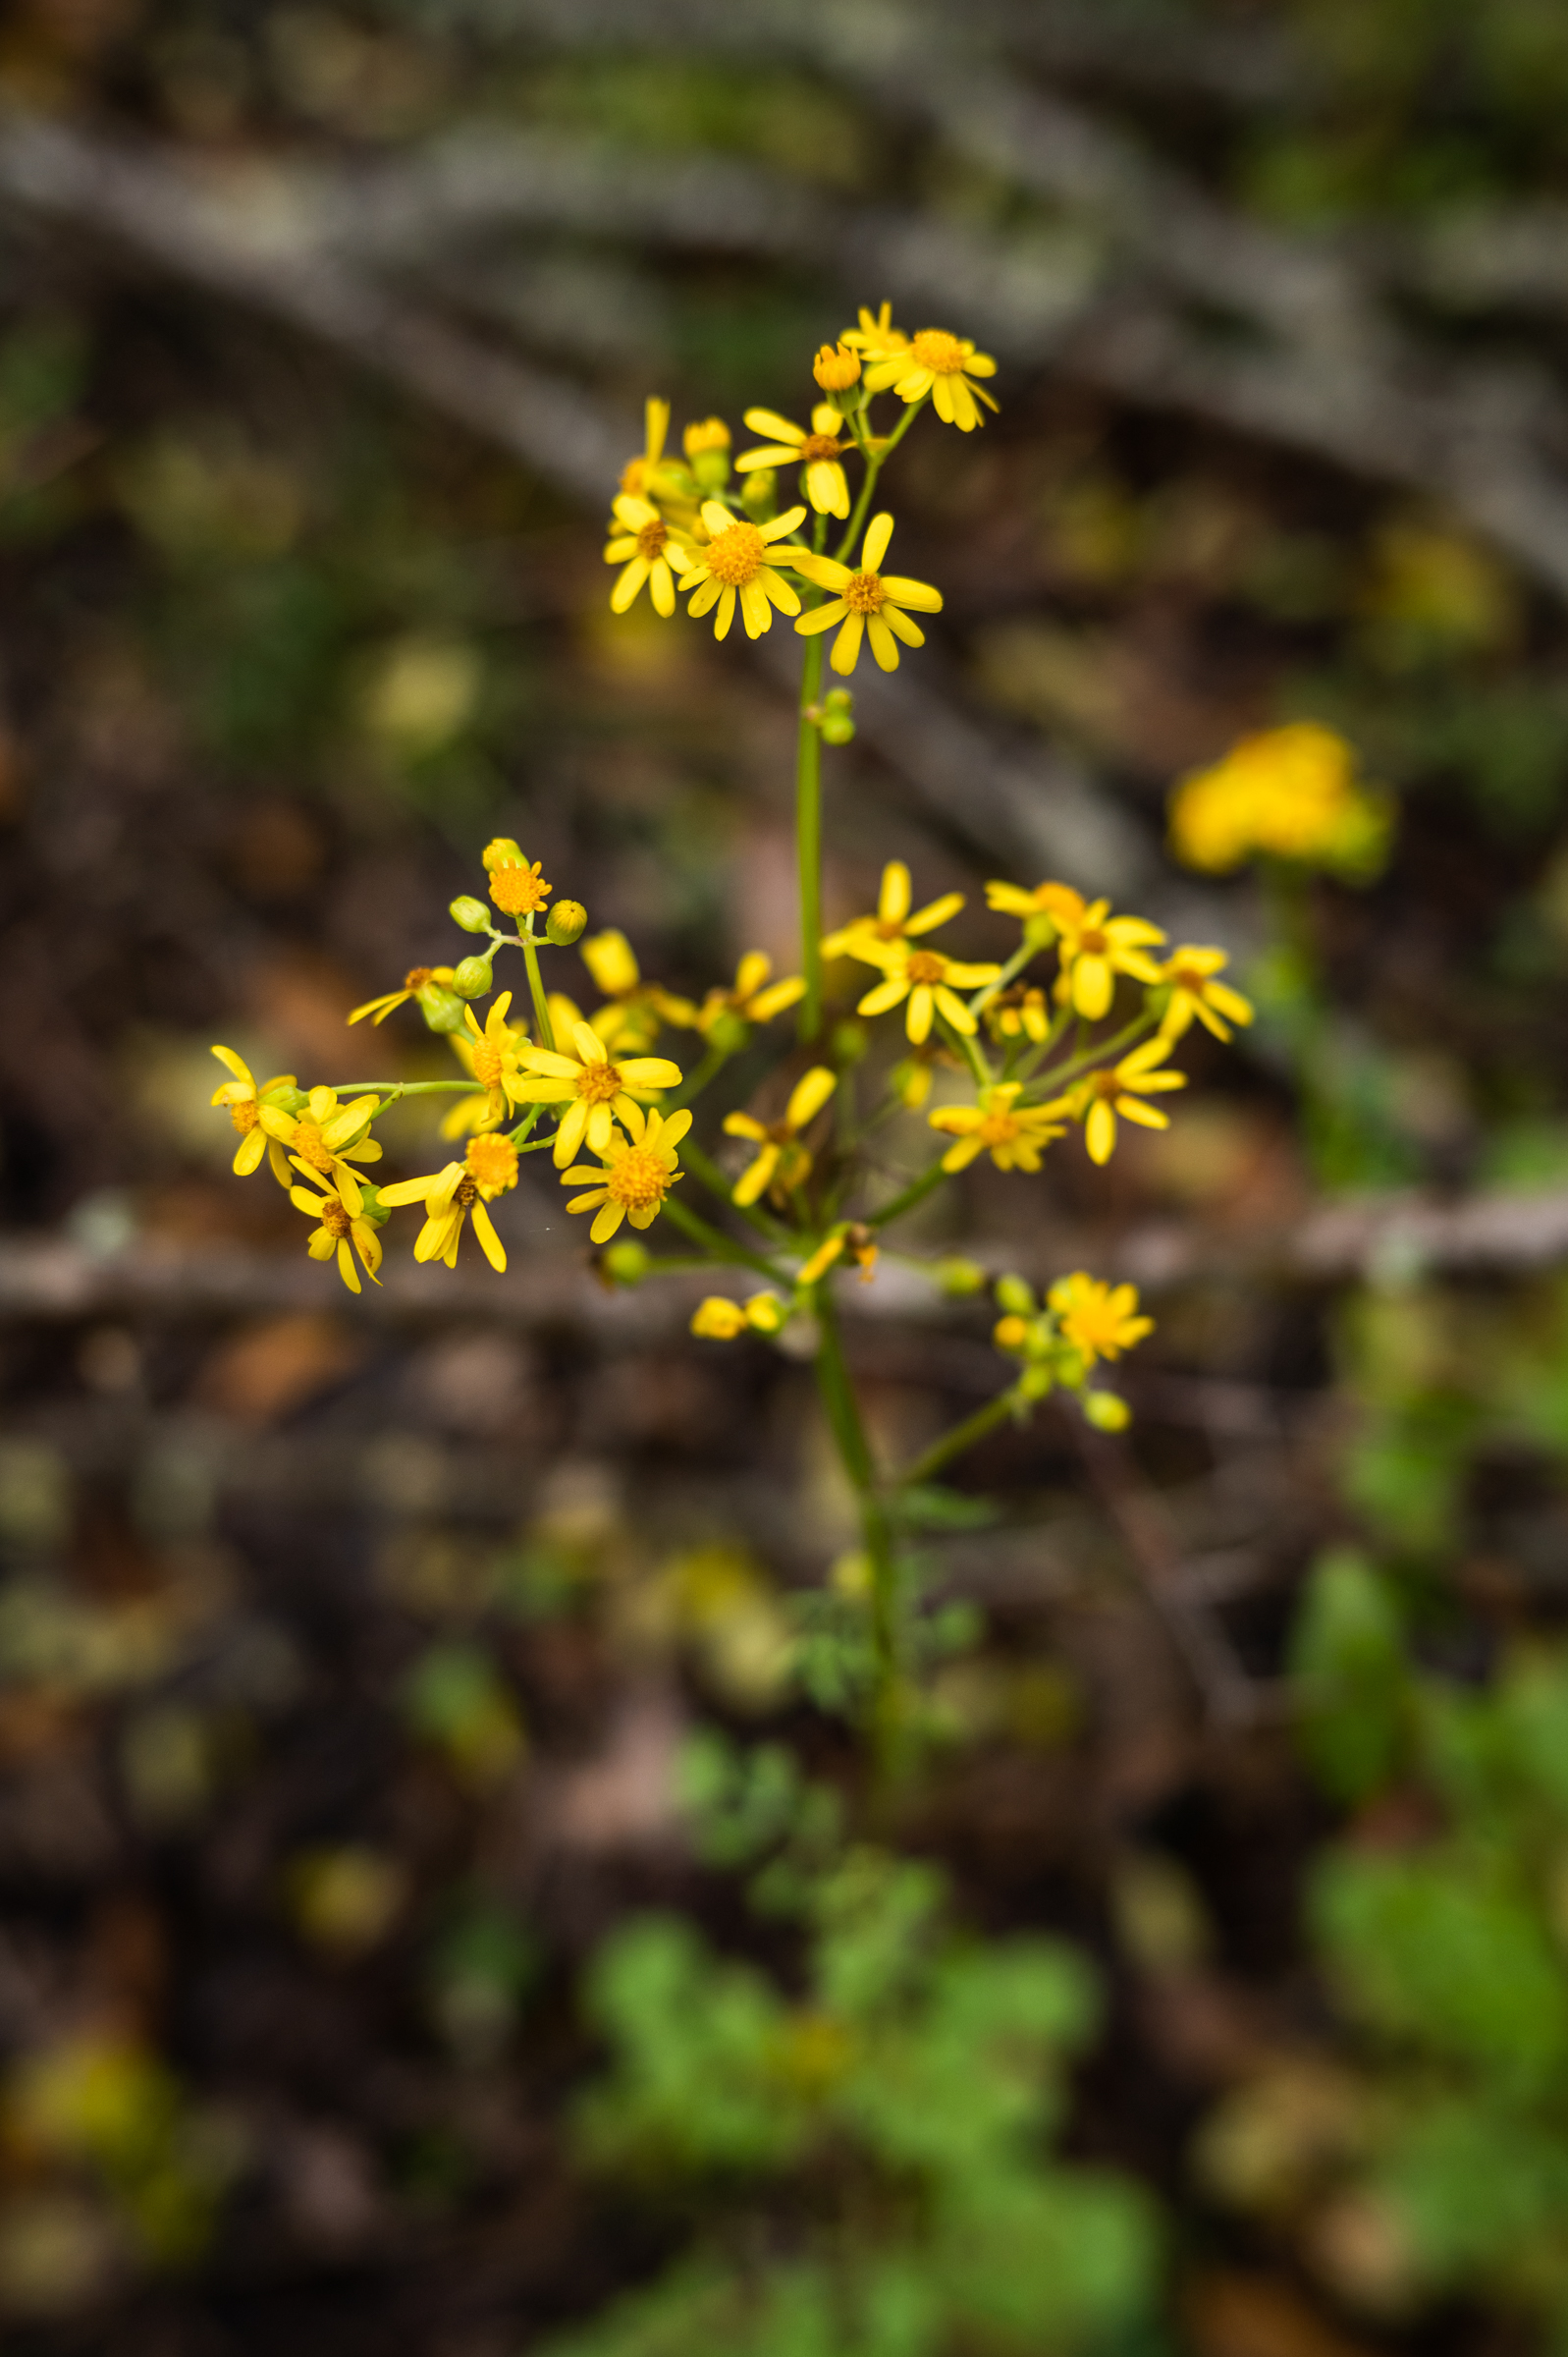 Butterweed growing in a hardwood forest